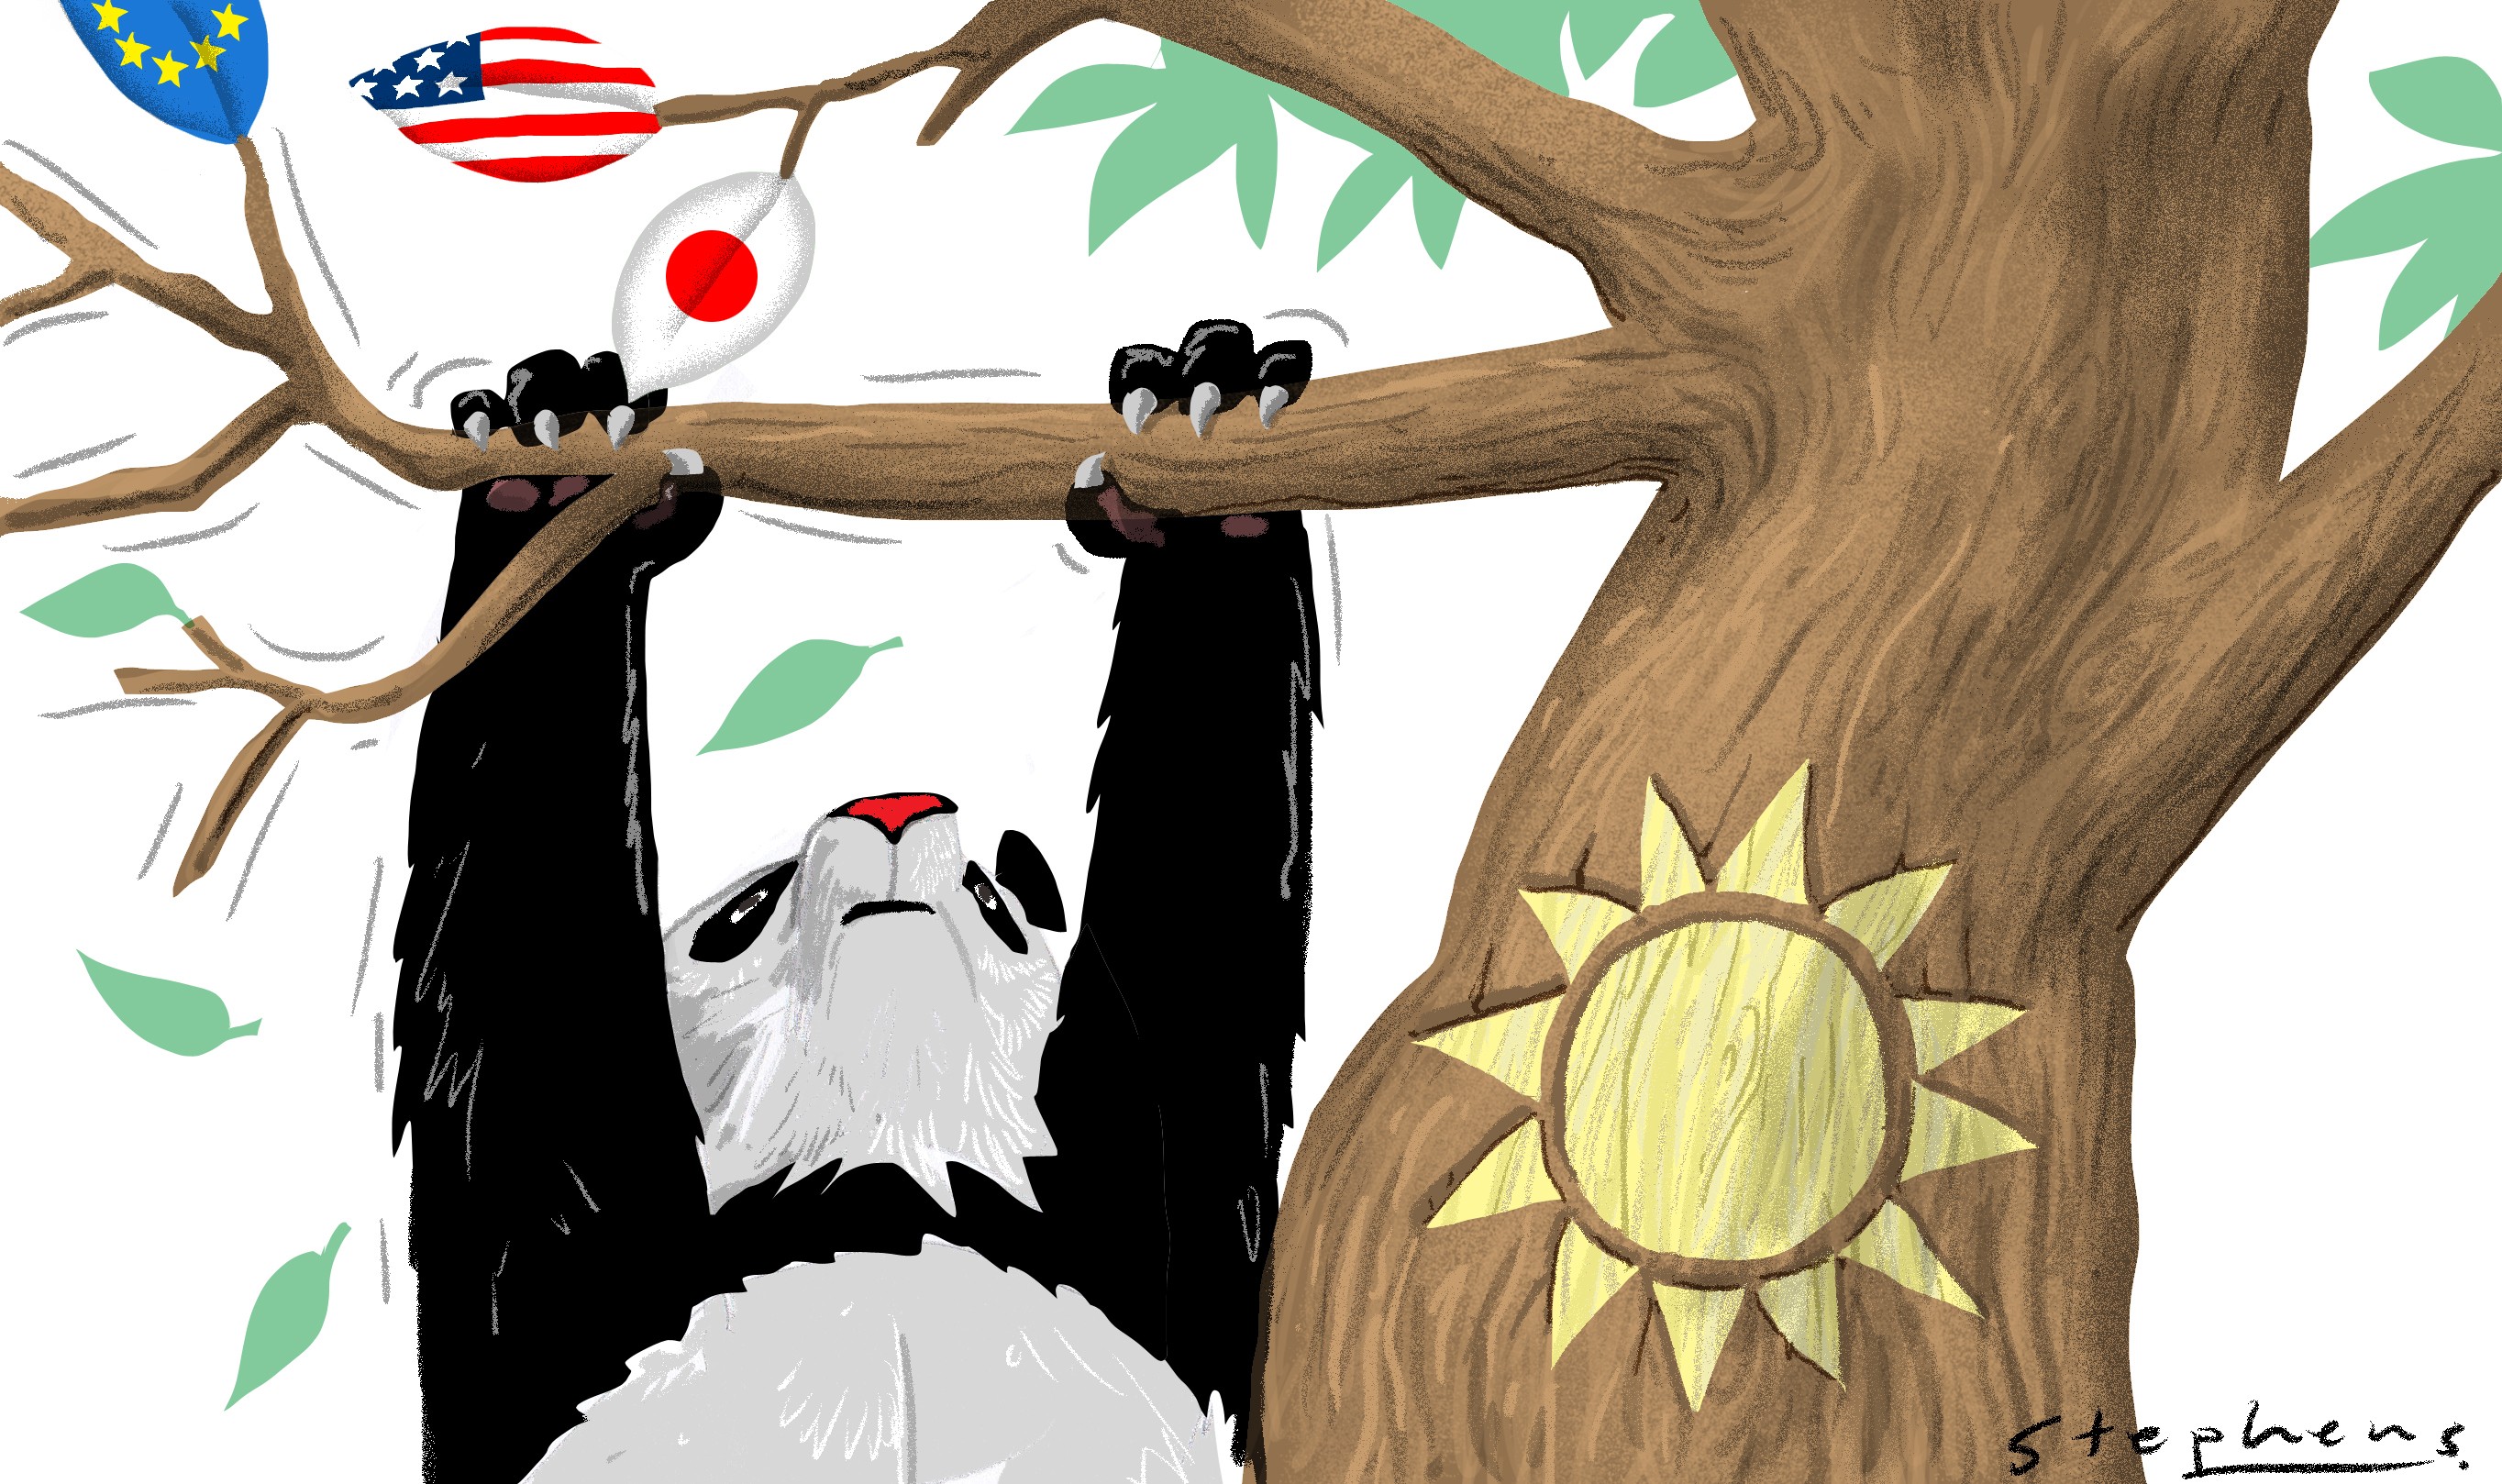 Beijing may see value in removing diplomatic recognition for Taipei even without achieving any concessions from Taiwan. Illustration: Craig Stephens